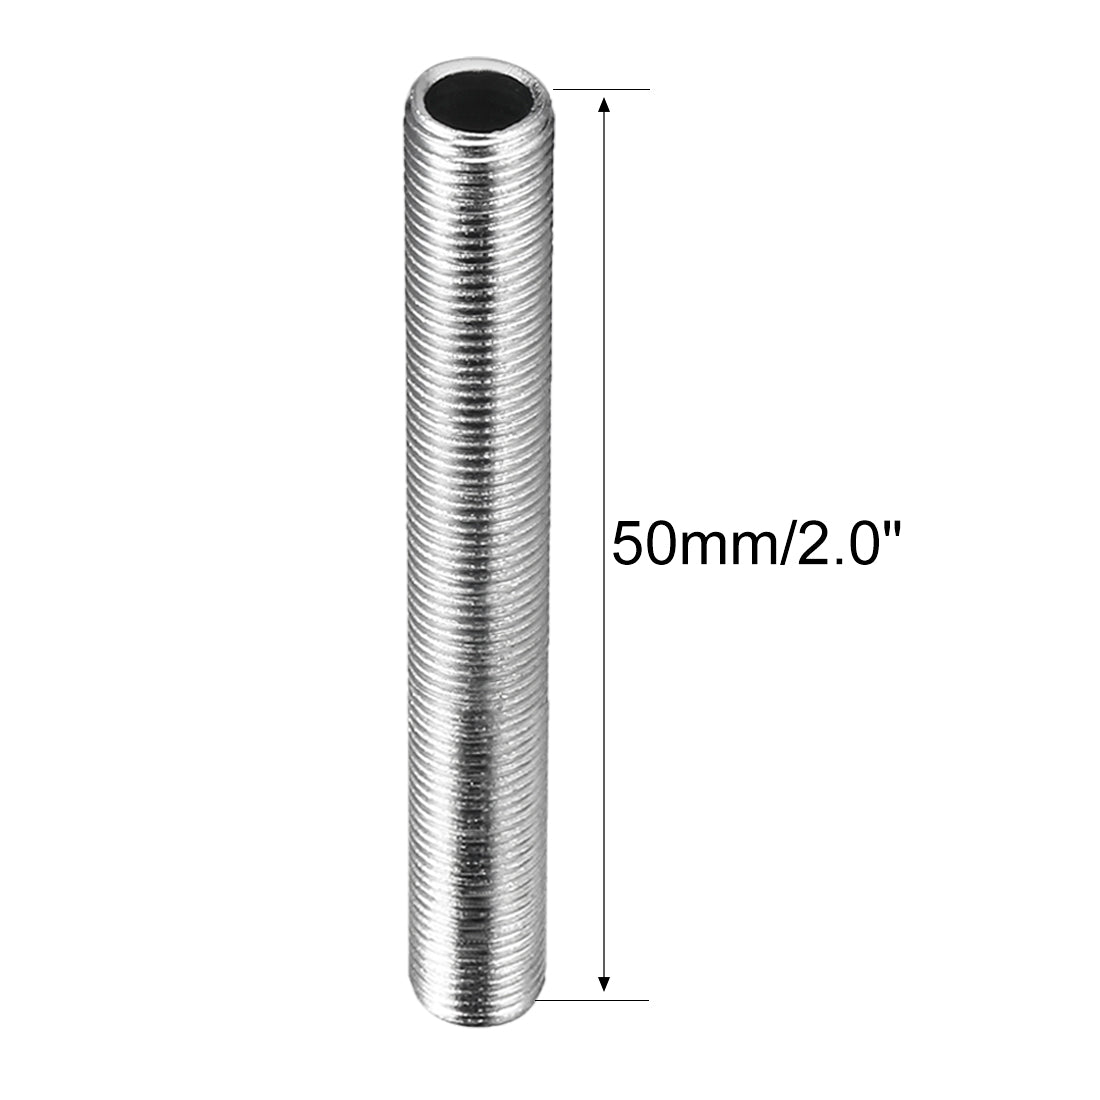 uxcell Uxcell Zinc Plated Lamp Pipe Nipple M10 50mm Length 1mm Pitch All Threaded 10Pcs